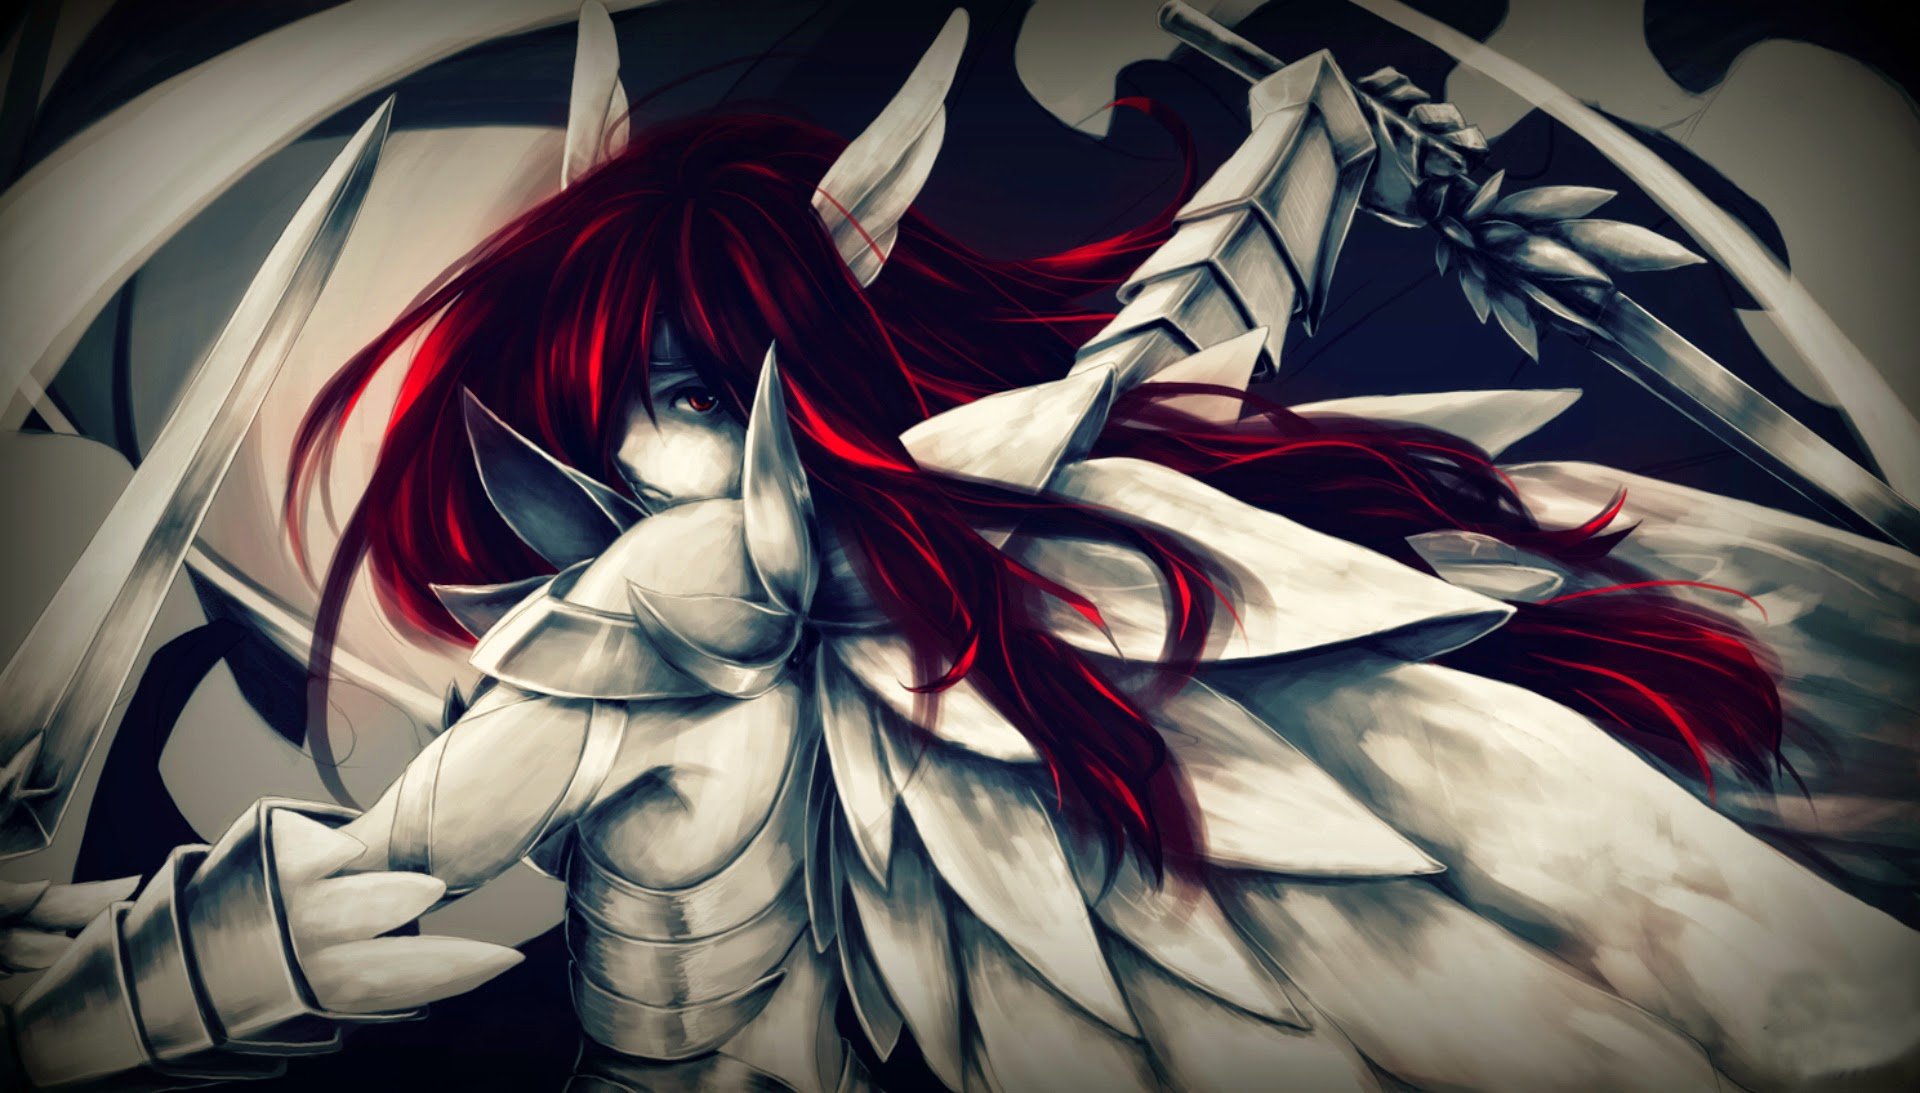 Fairy Tail Wallpaper Hd Erza Erza scarlet is an s class